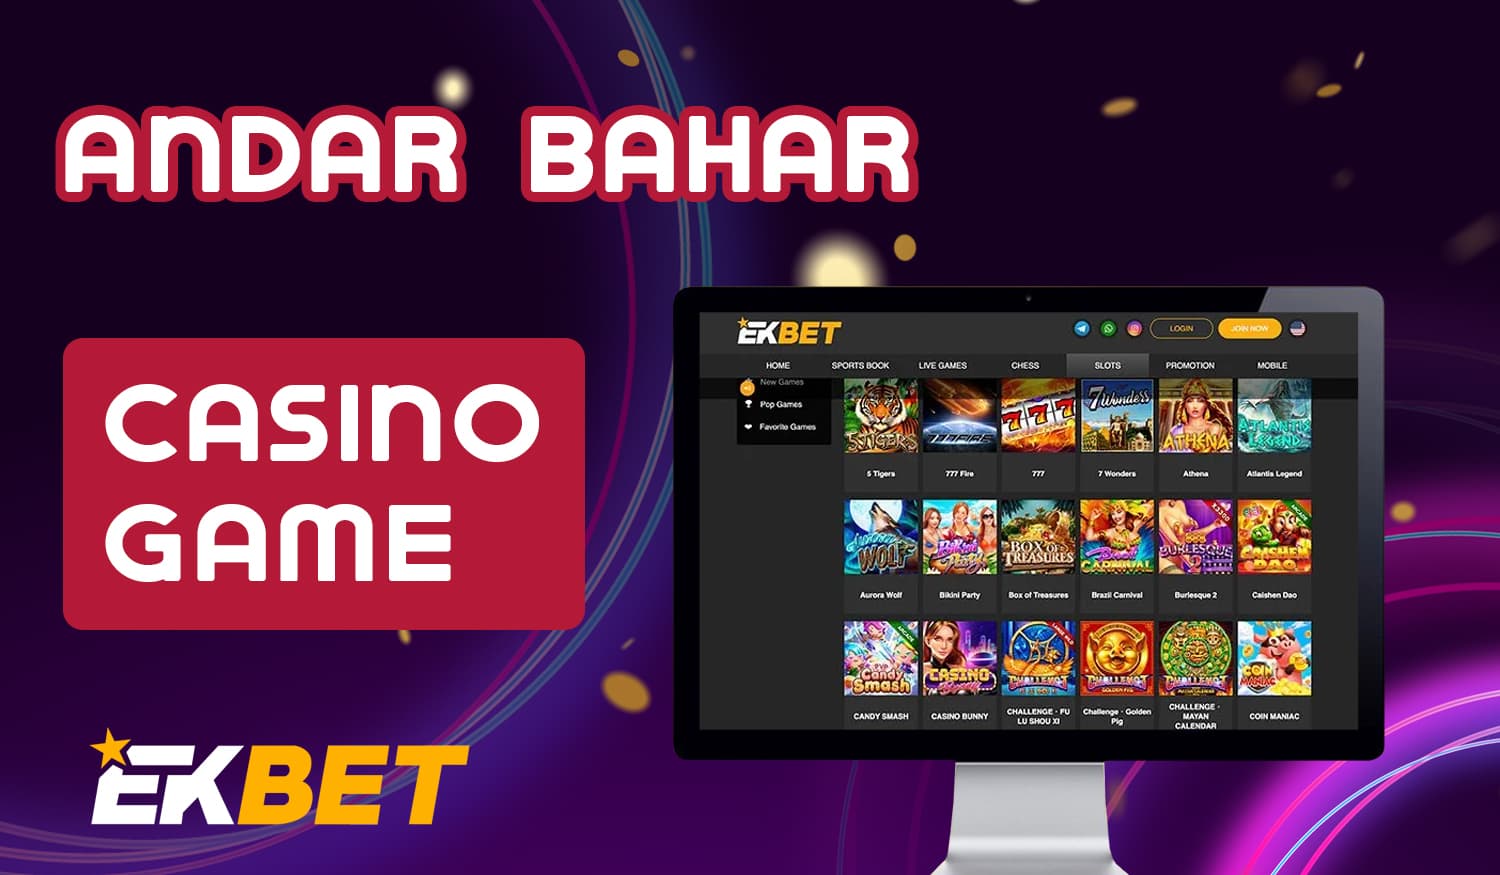 What games are available to online casino fans at Ekbet India